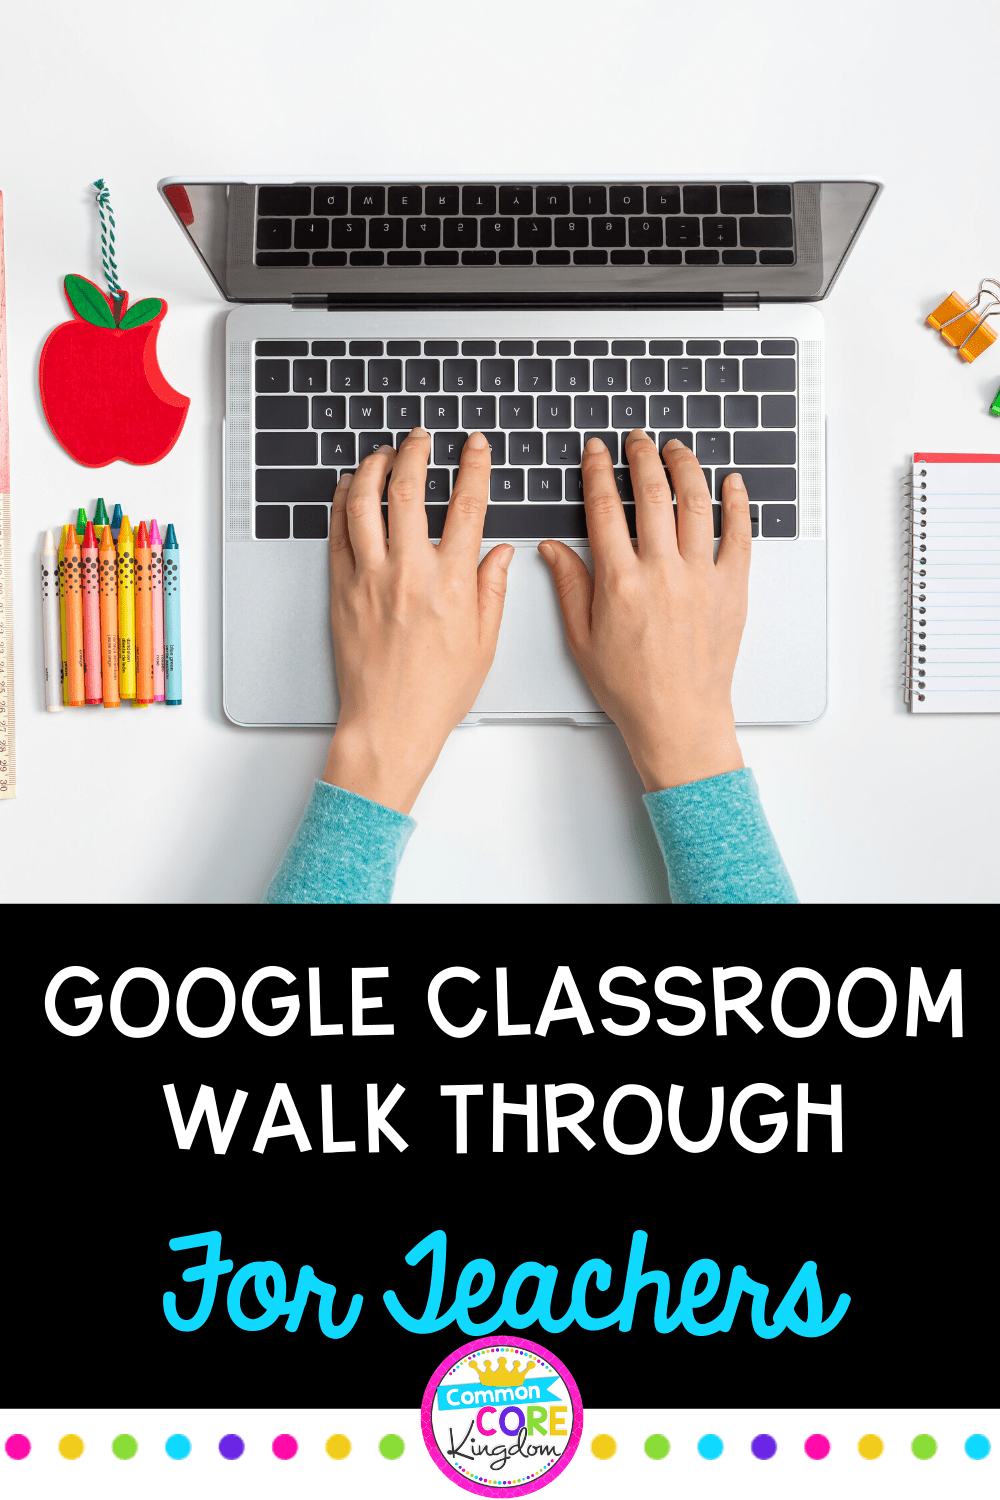 Teacher hands on keyboard of grey laptop with text that says google classroom walk through in white against black box on bottom half of page